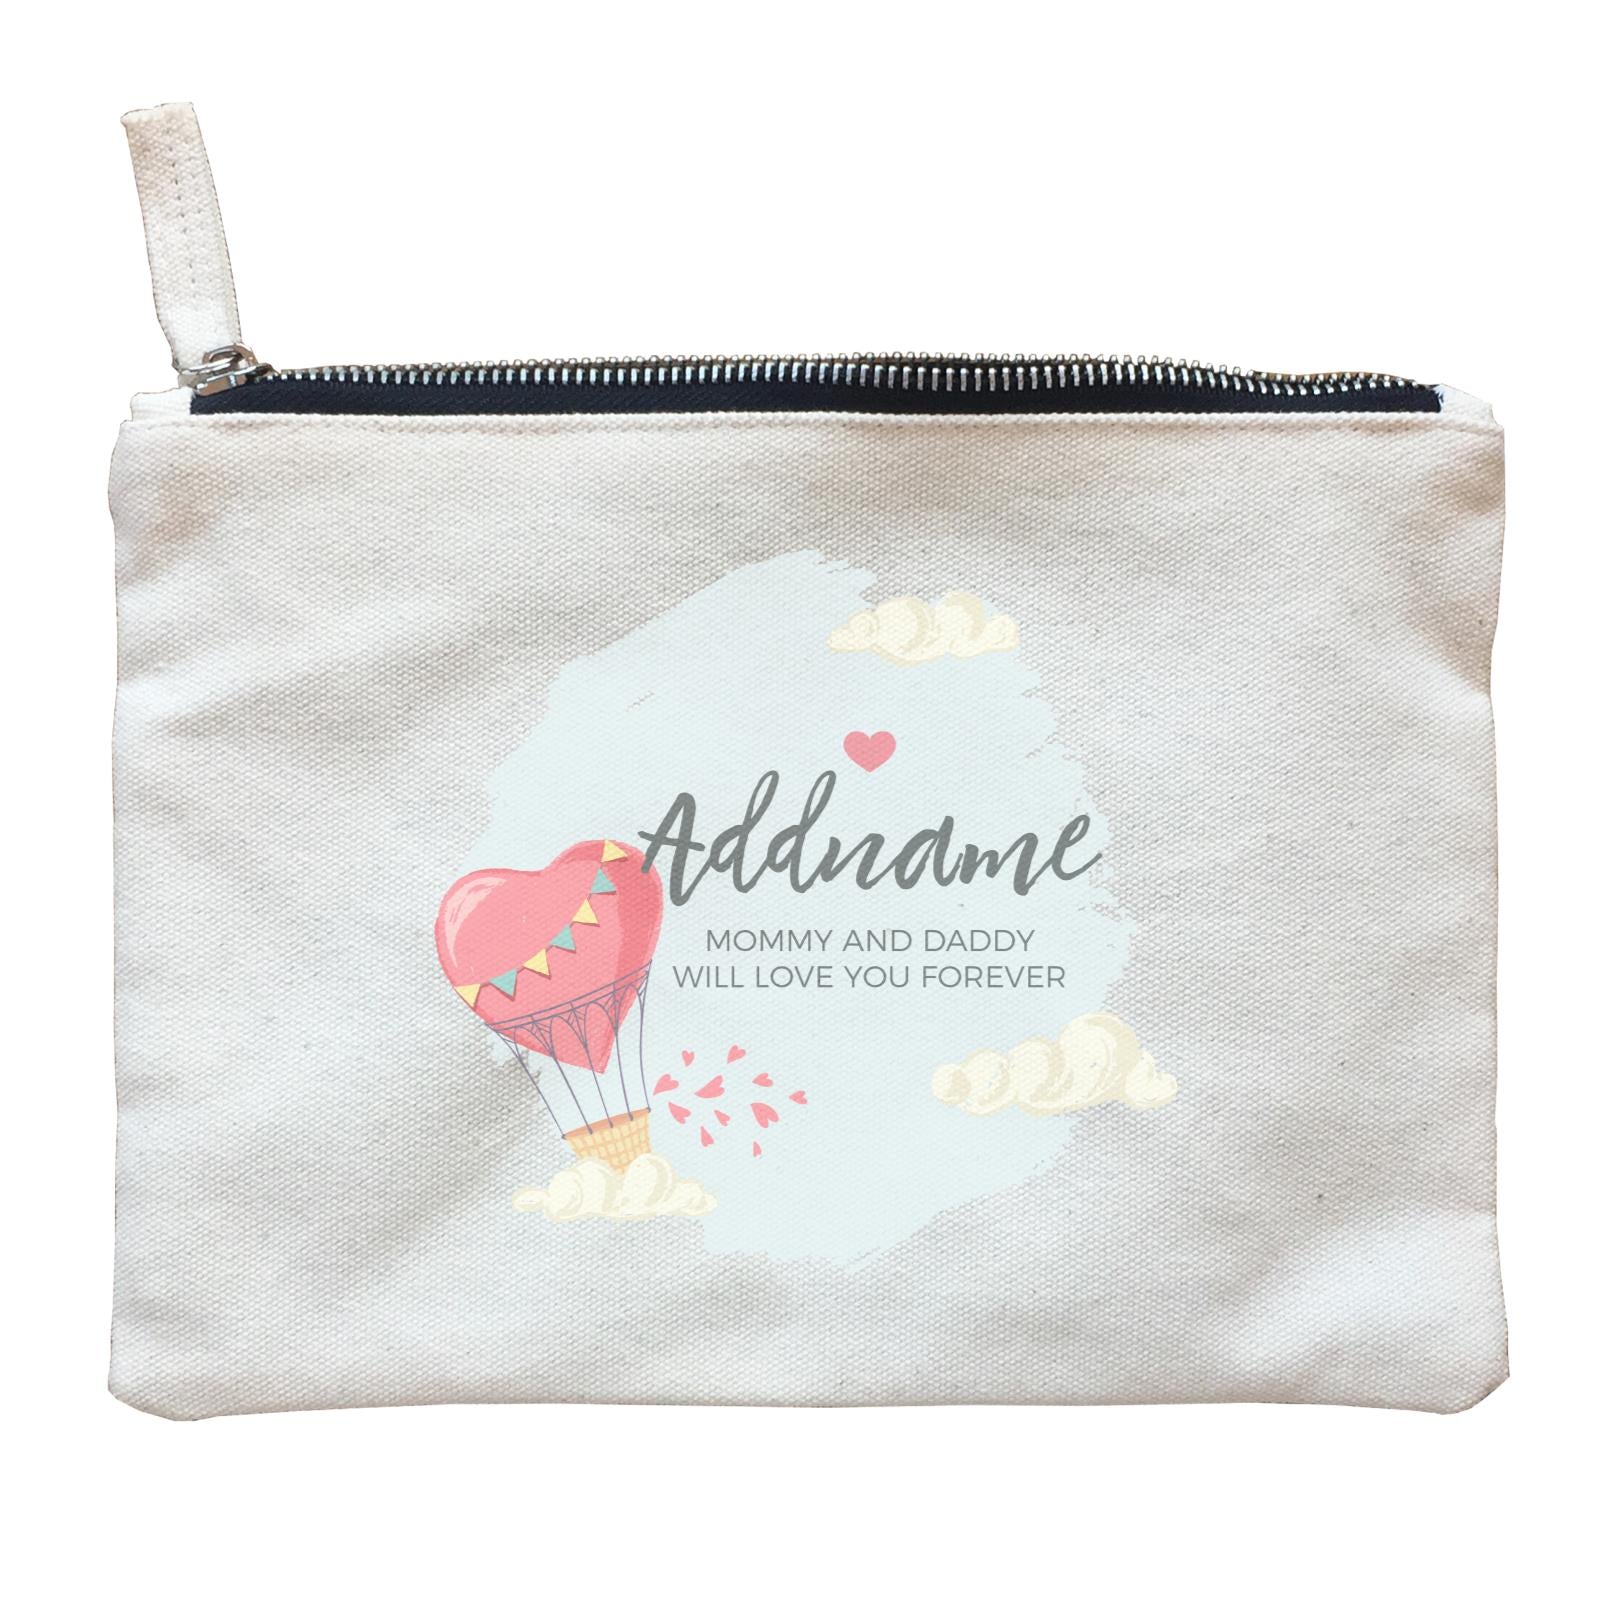 Heart Shaped Hot Air Balloon with Hearts and Clouds Personalizable with Name and Text Zipper Pouch